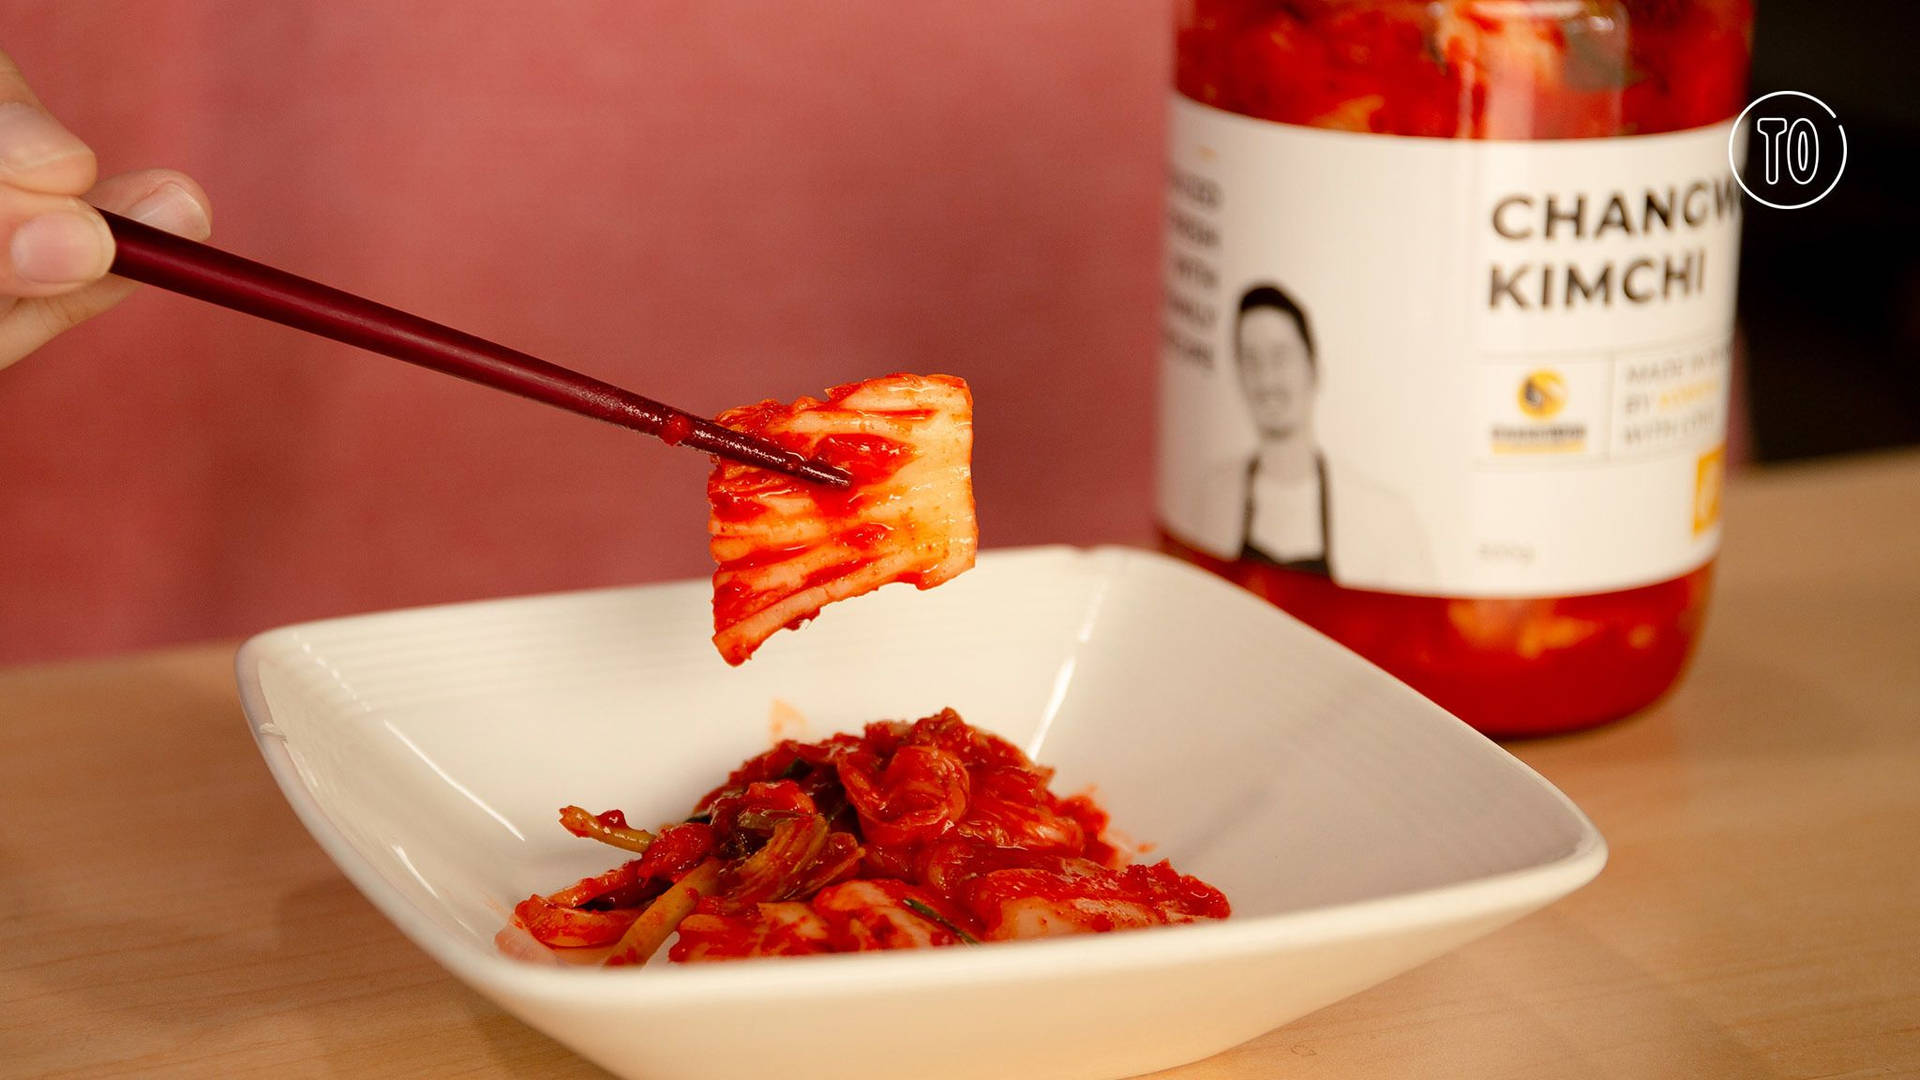 "A Fascinating Mix of Kimchi Ready to Eat" Wallpaper